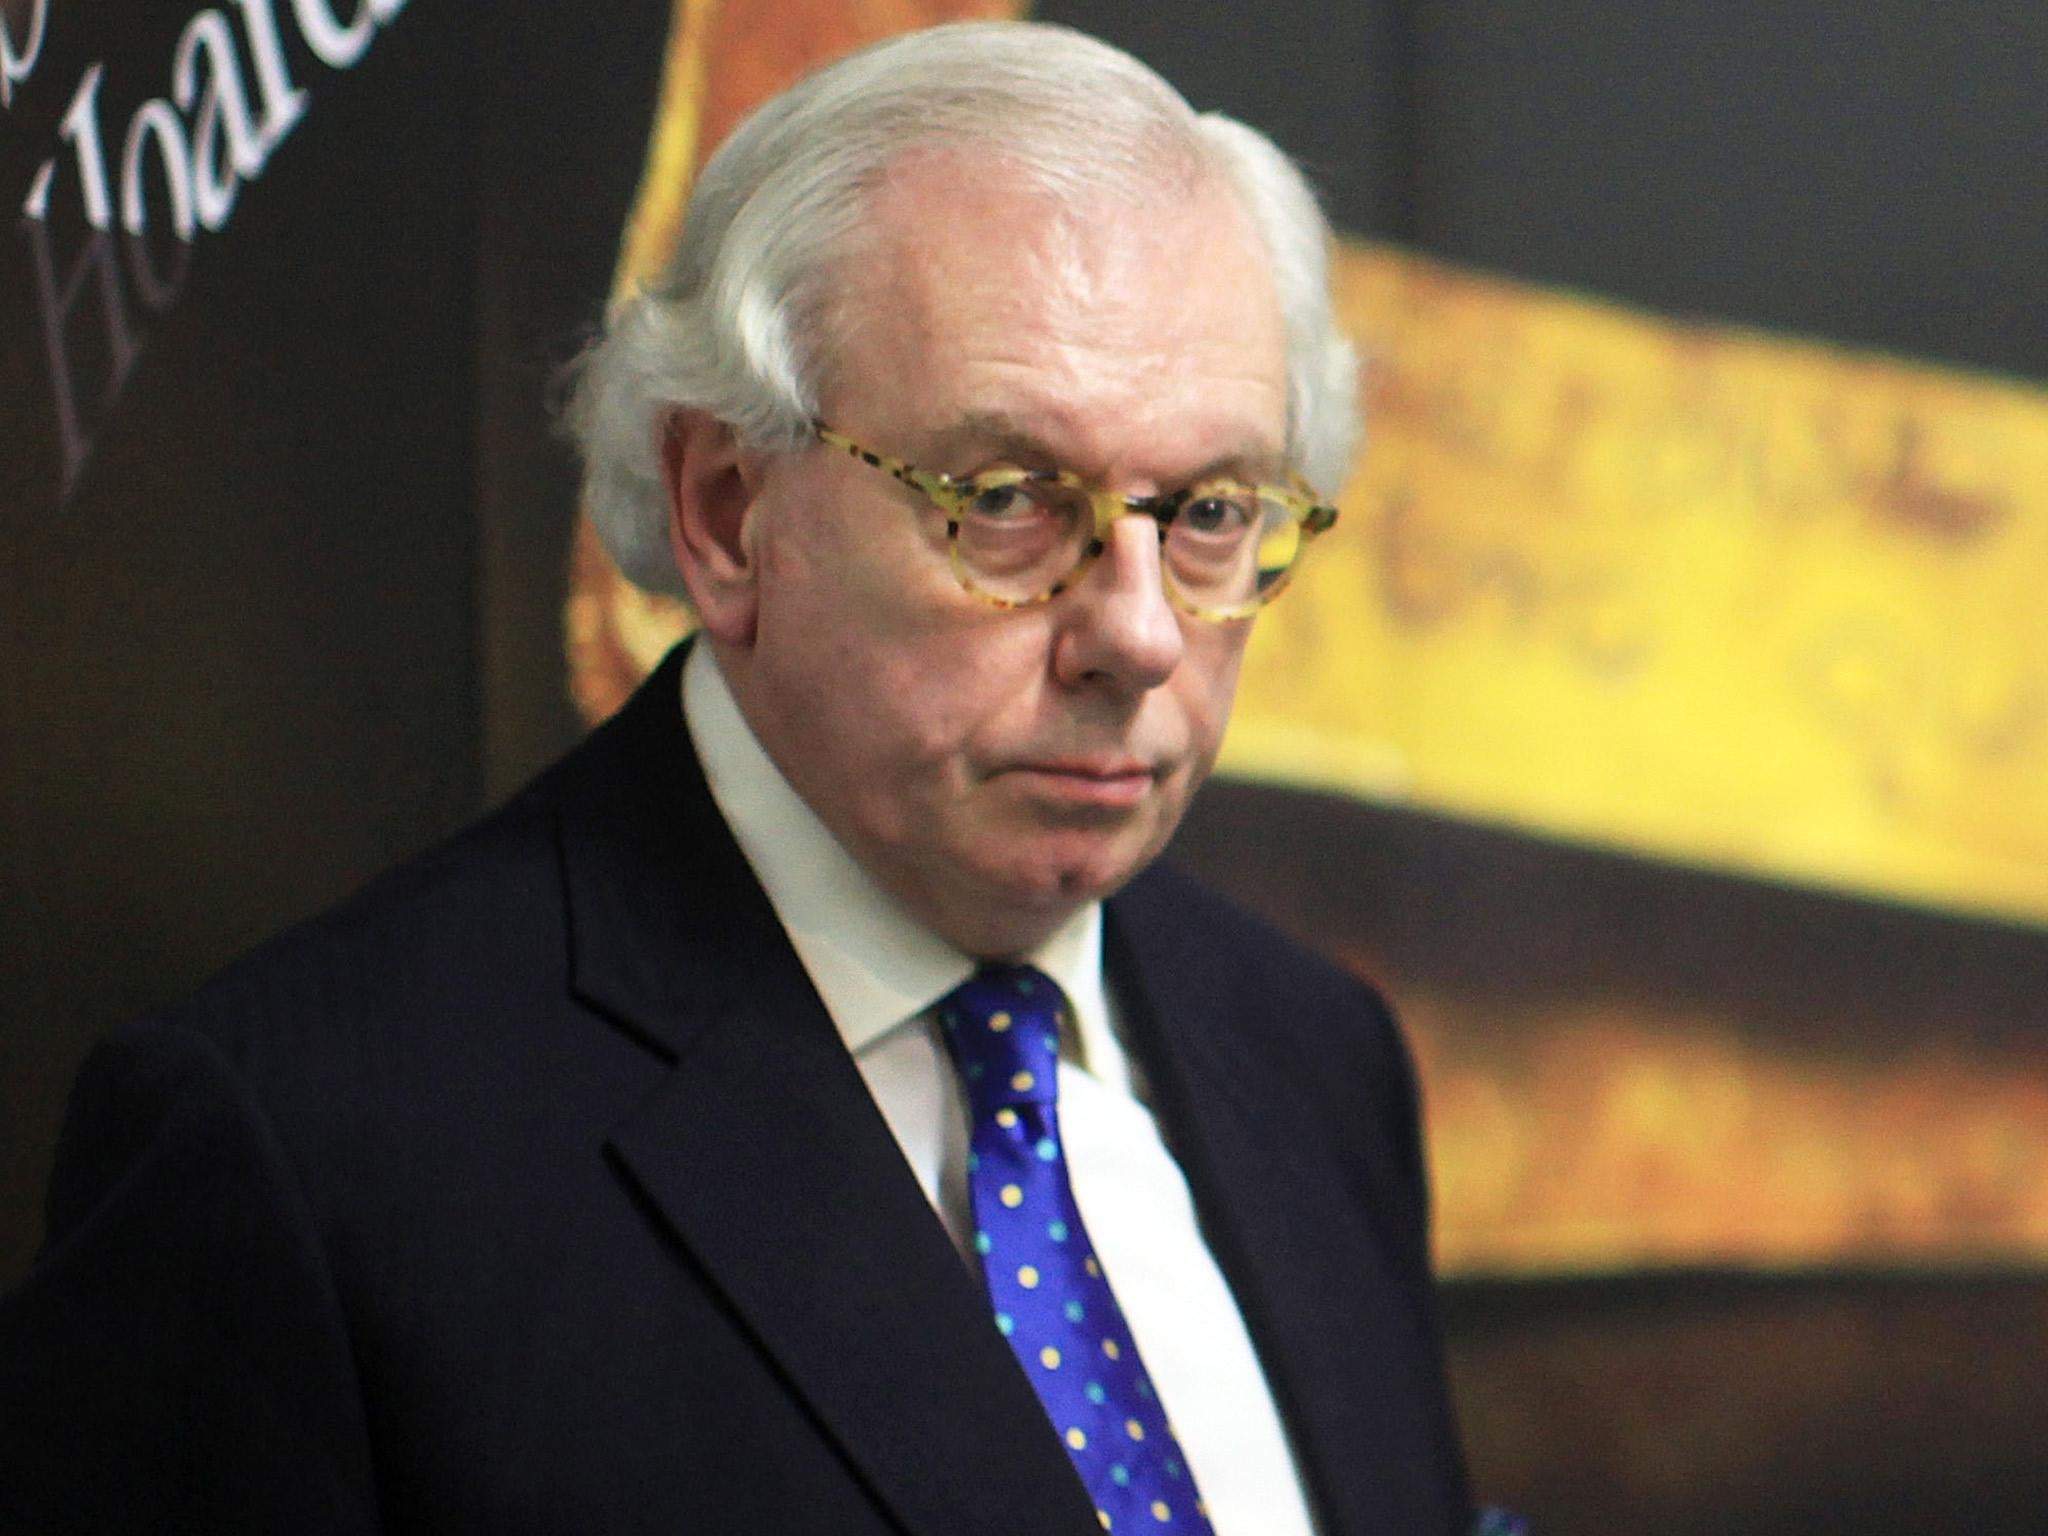 It's sad David Starkey's career has ended this way but the fallout sends a clear message that racism will not be tolerated